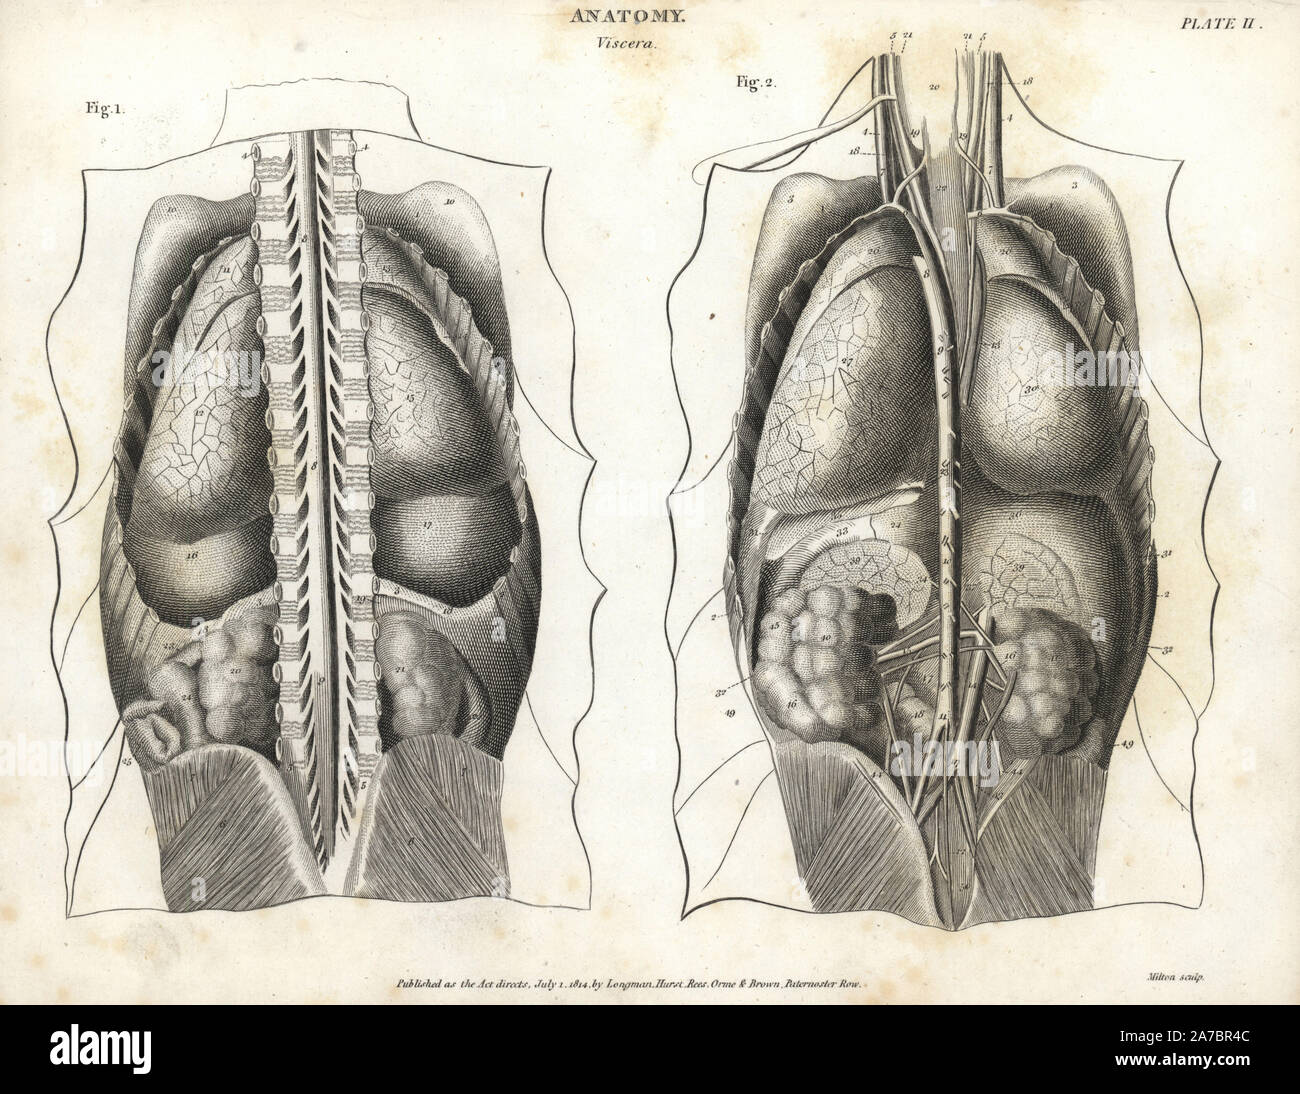 Anatomy of human internal organs from the back showing spine, lungs, liver, intestines, gallbladder, etc. Copperplate engraving by Milton from Abraham Rees' Cyclopedia or Universal Dictionary of Arts, Sciences and Literature, Longman, Hurst, Rees, Orme and Brown, London, 1820. Stock Photo